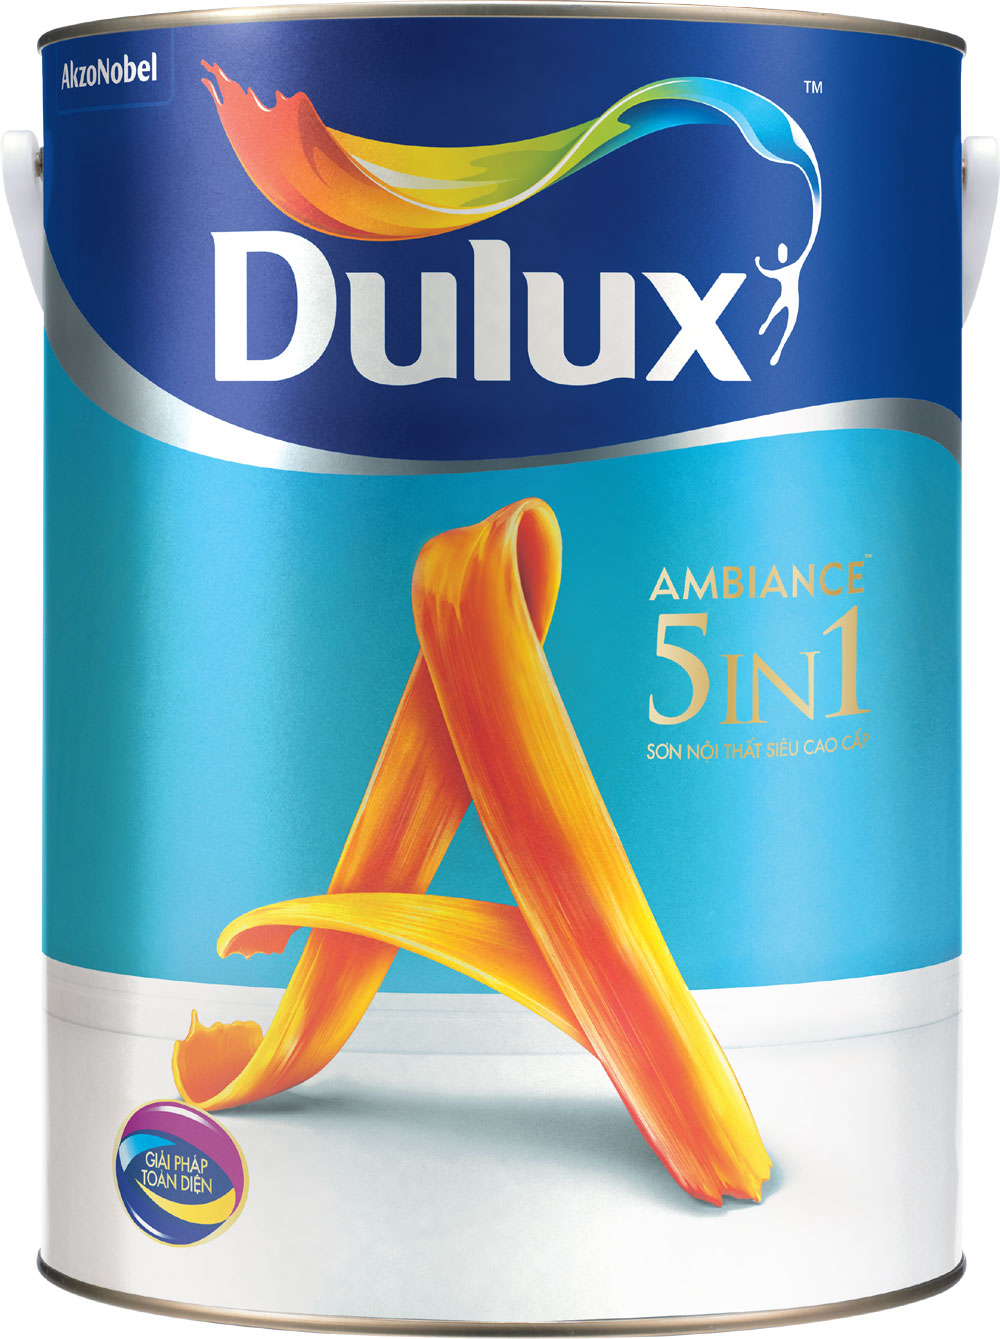 DULUX AMBIANCE 5 IN 1